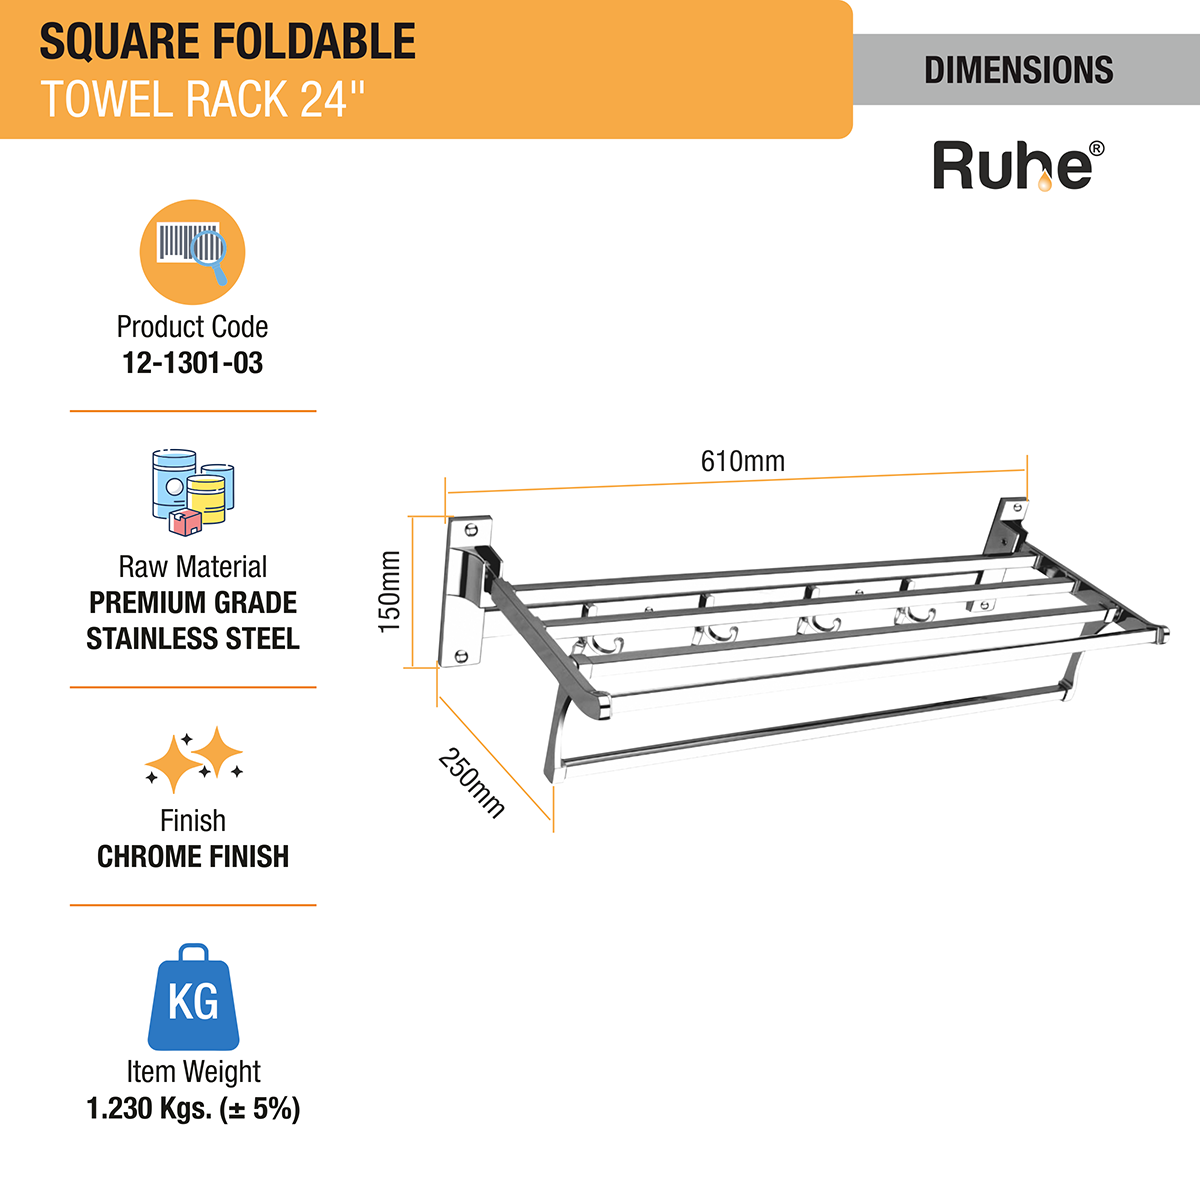 Square Foldable Towel Rack (24 Inches) dimensions and size